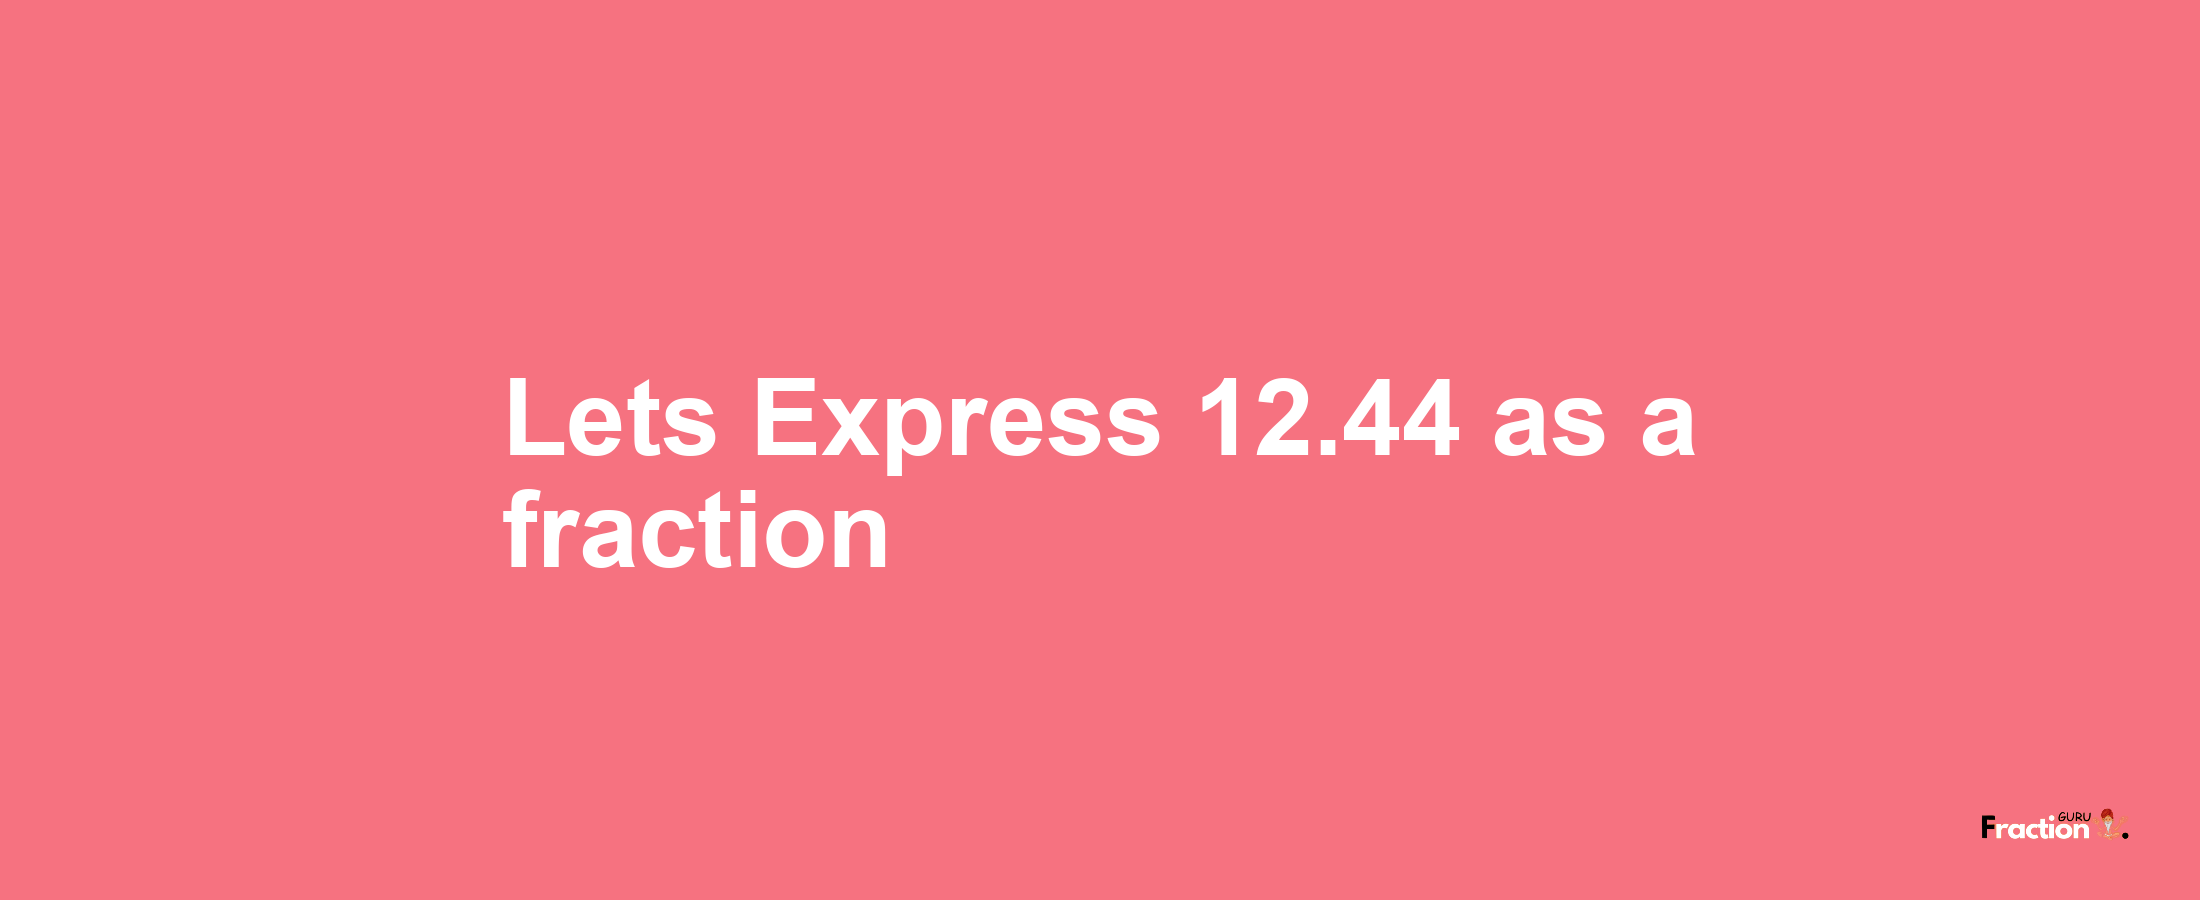 Lets Express 12.44 as afraction